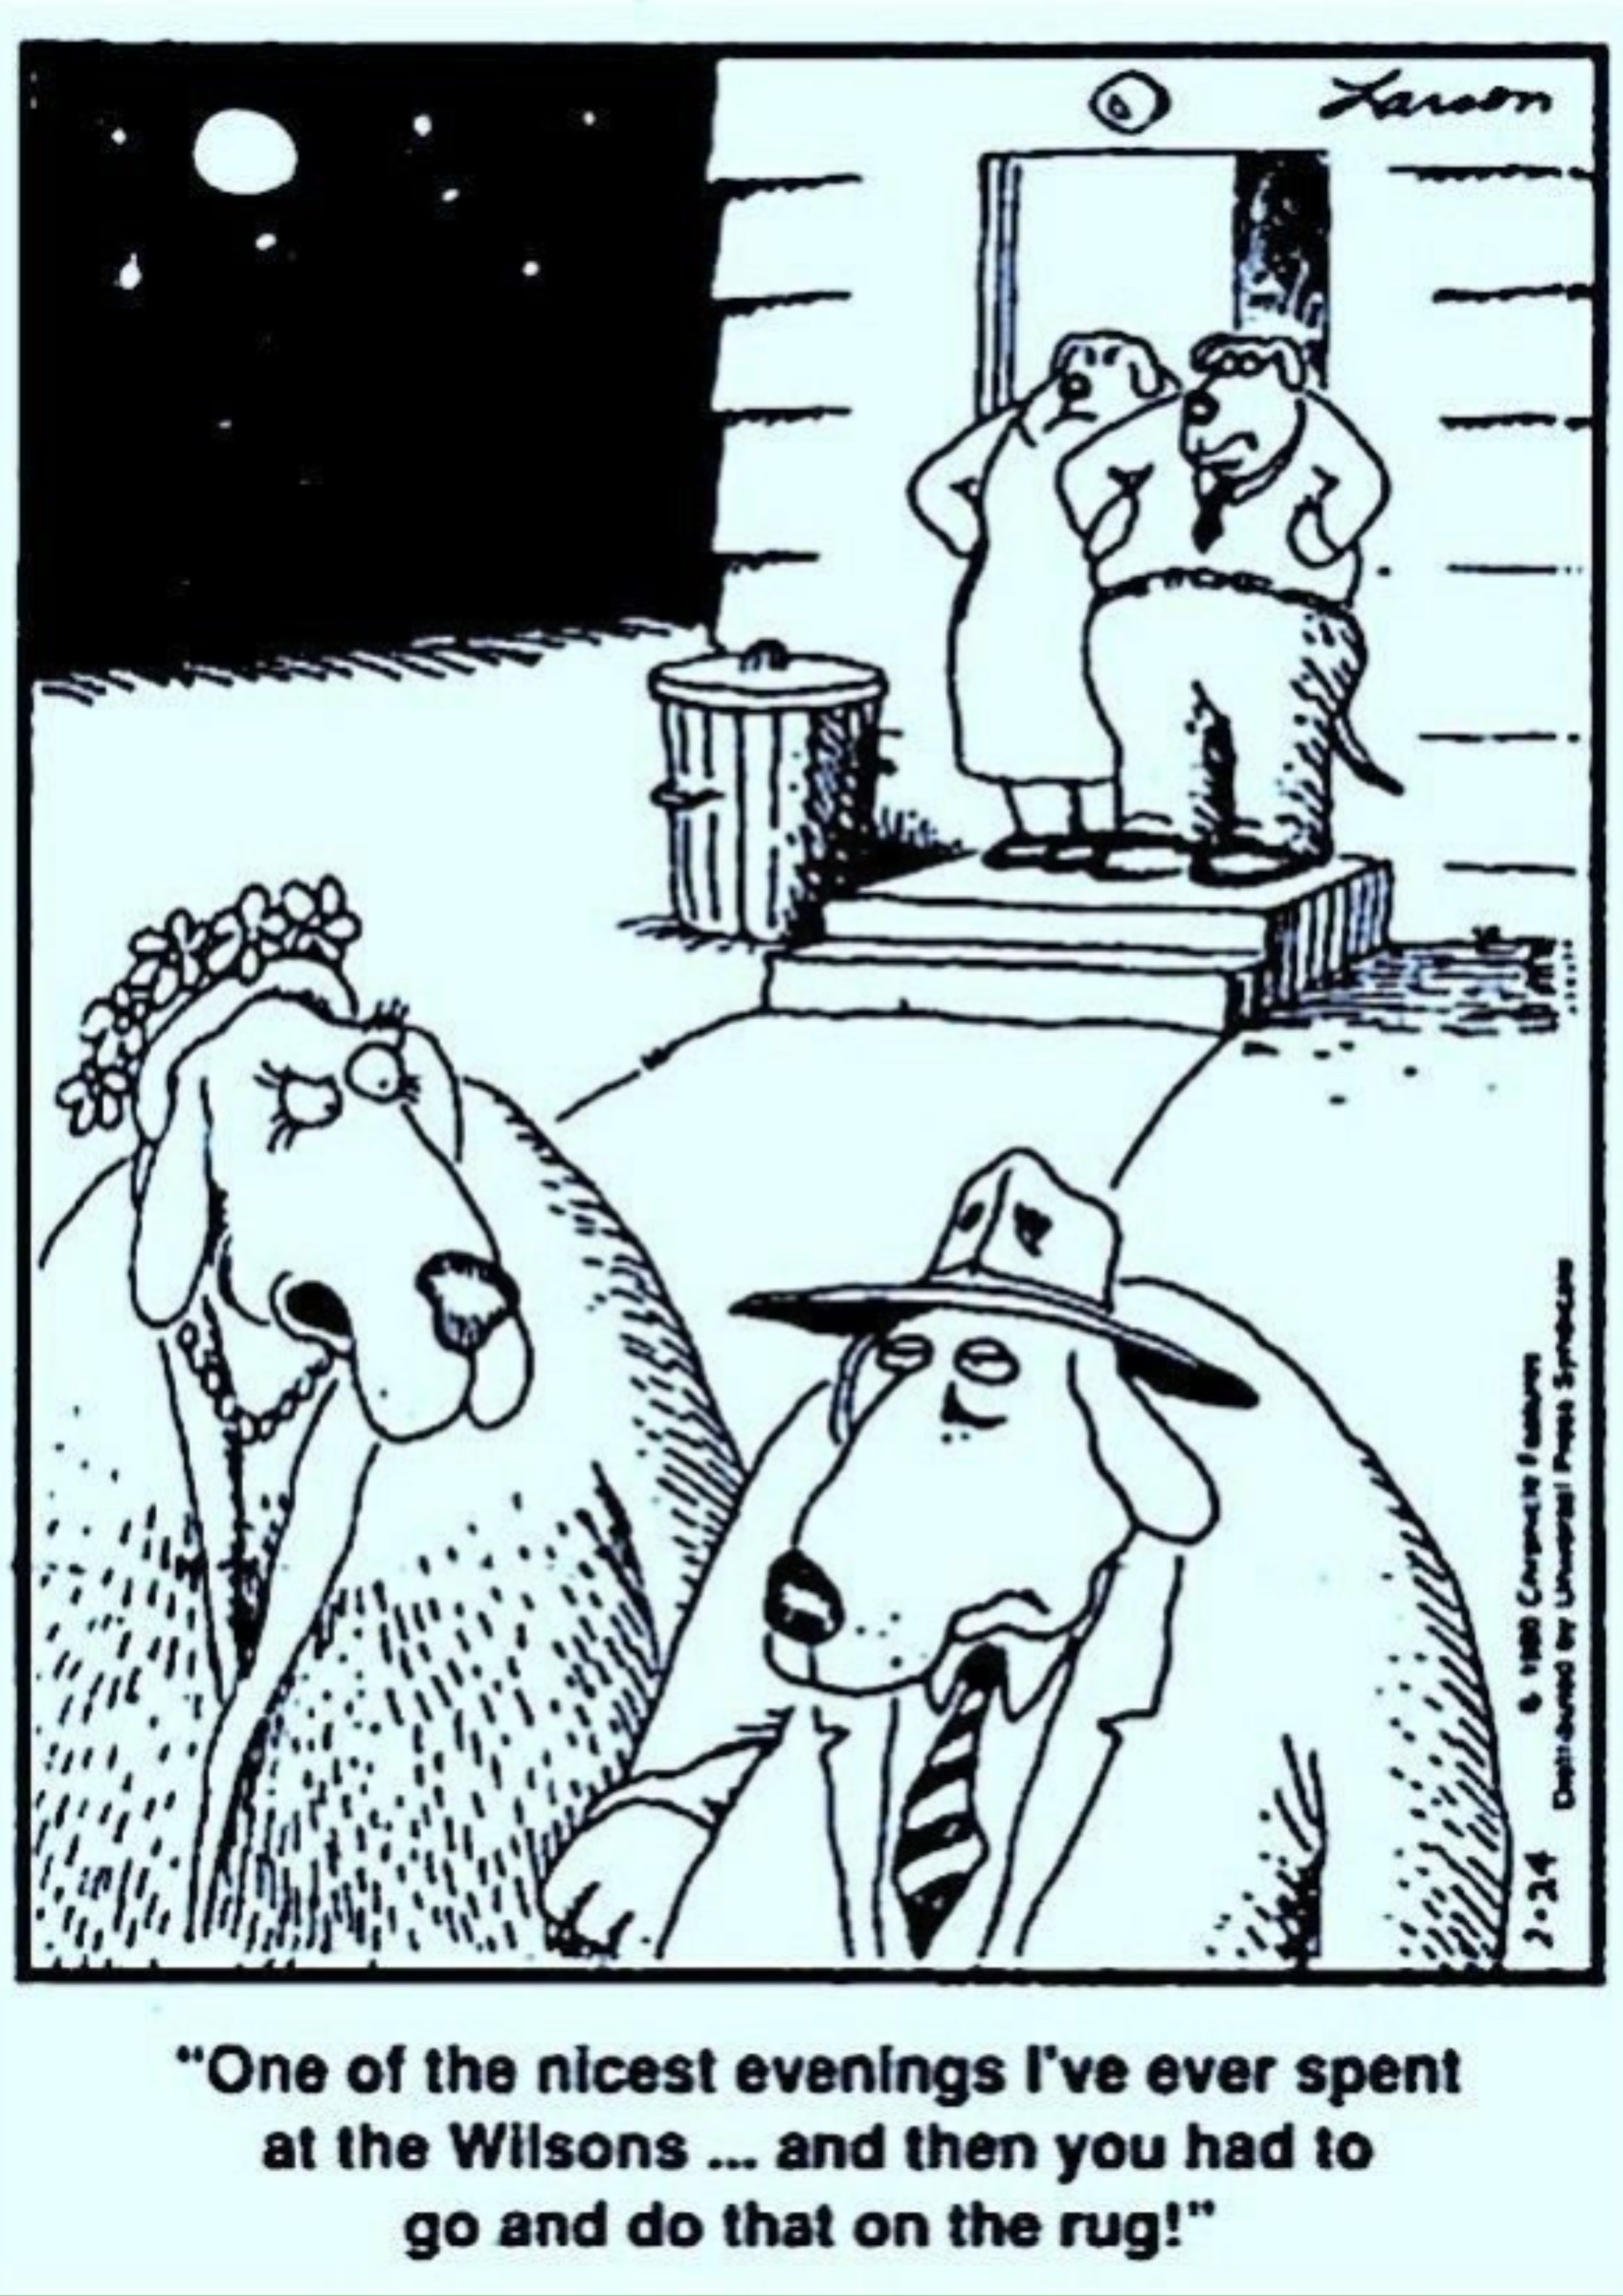 Far Side: Dog guest ruined dinner party by doing 